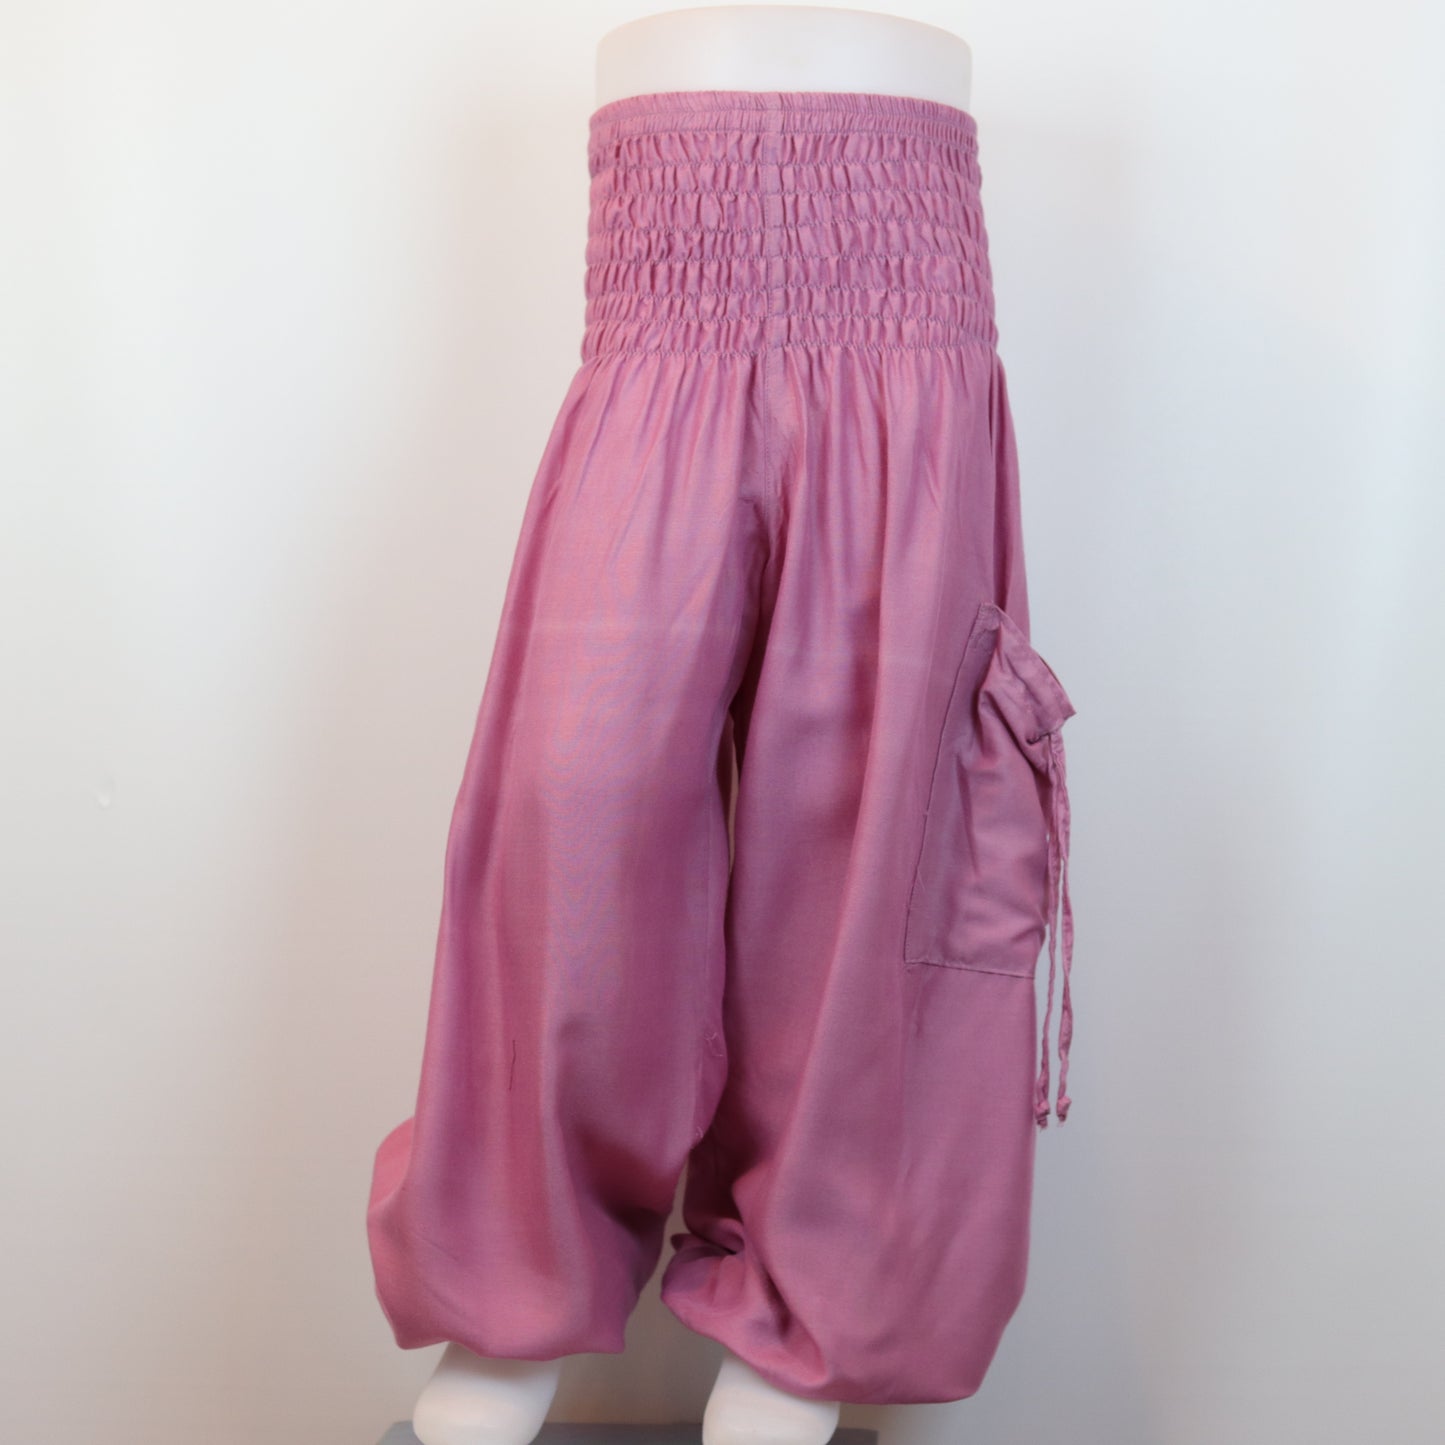 Plain Kids Alibaba Pants Size 7 Seven -Fits 6 to 8 Year Olds